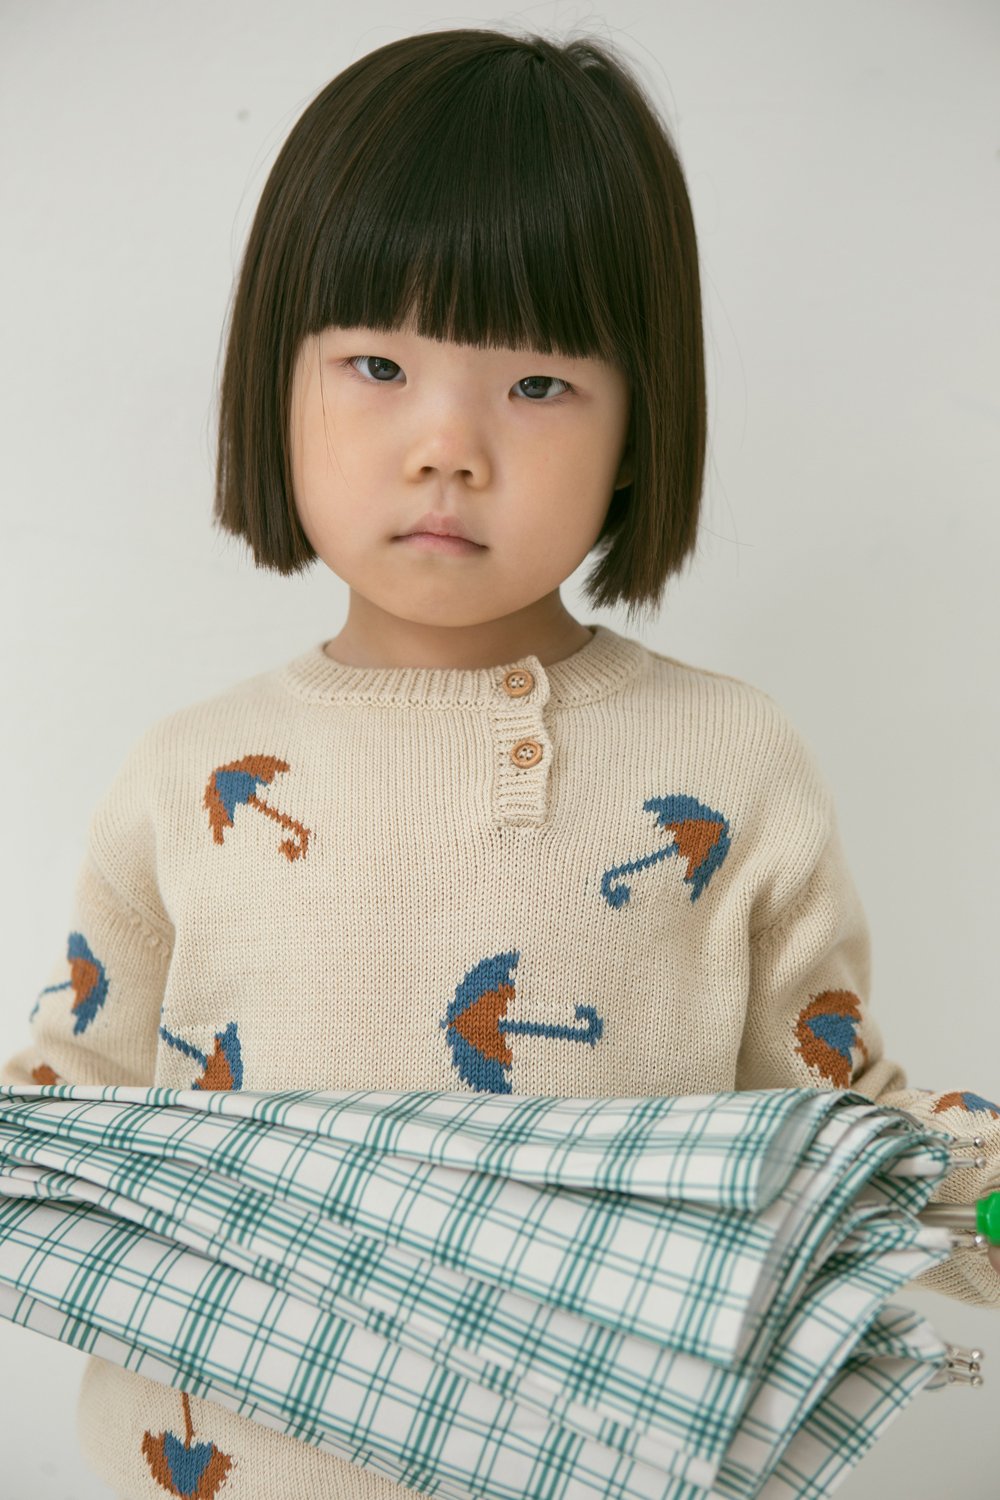 Fin and Vince Ribbed Knit Top in Sand Umbrella | 30% OFF SALE | Children of the Wild